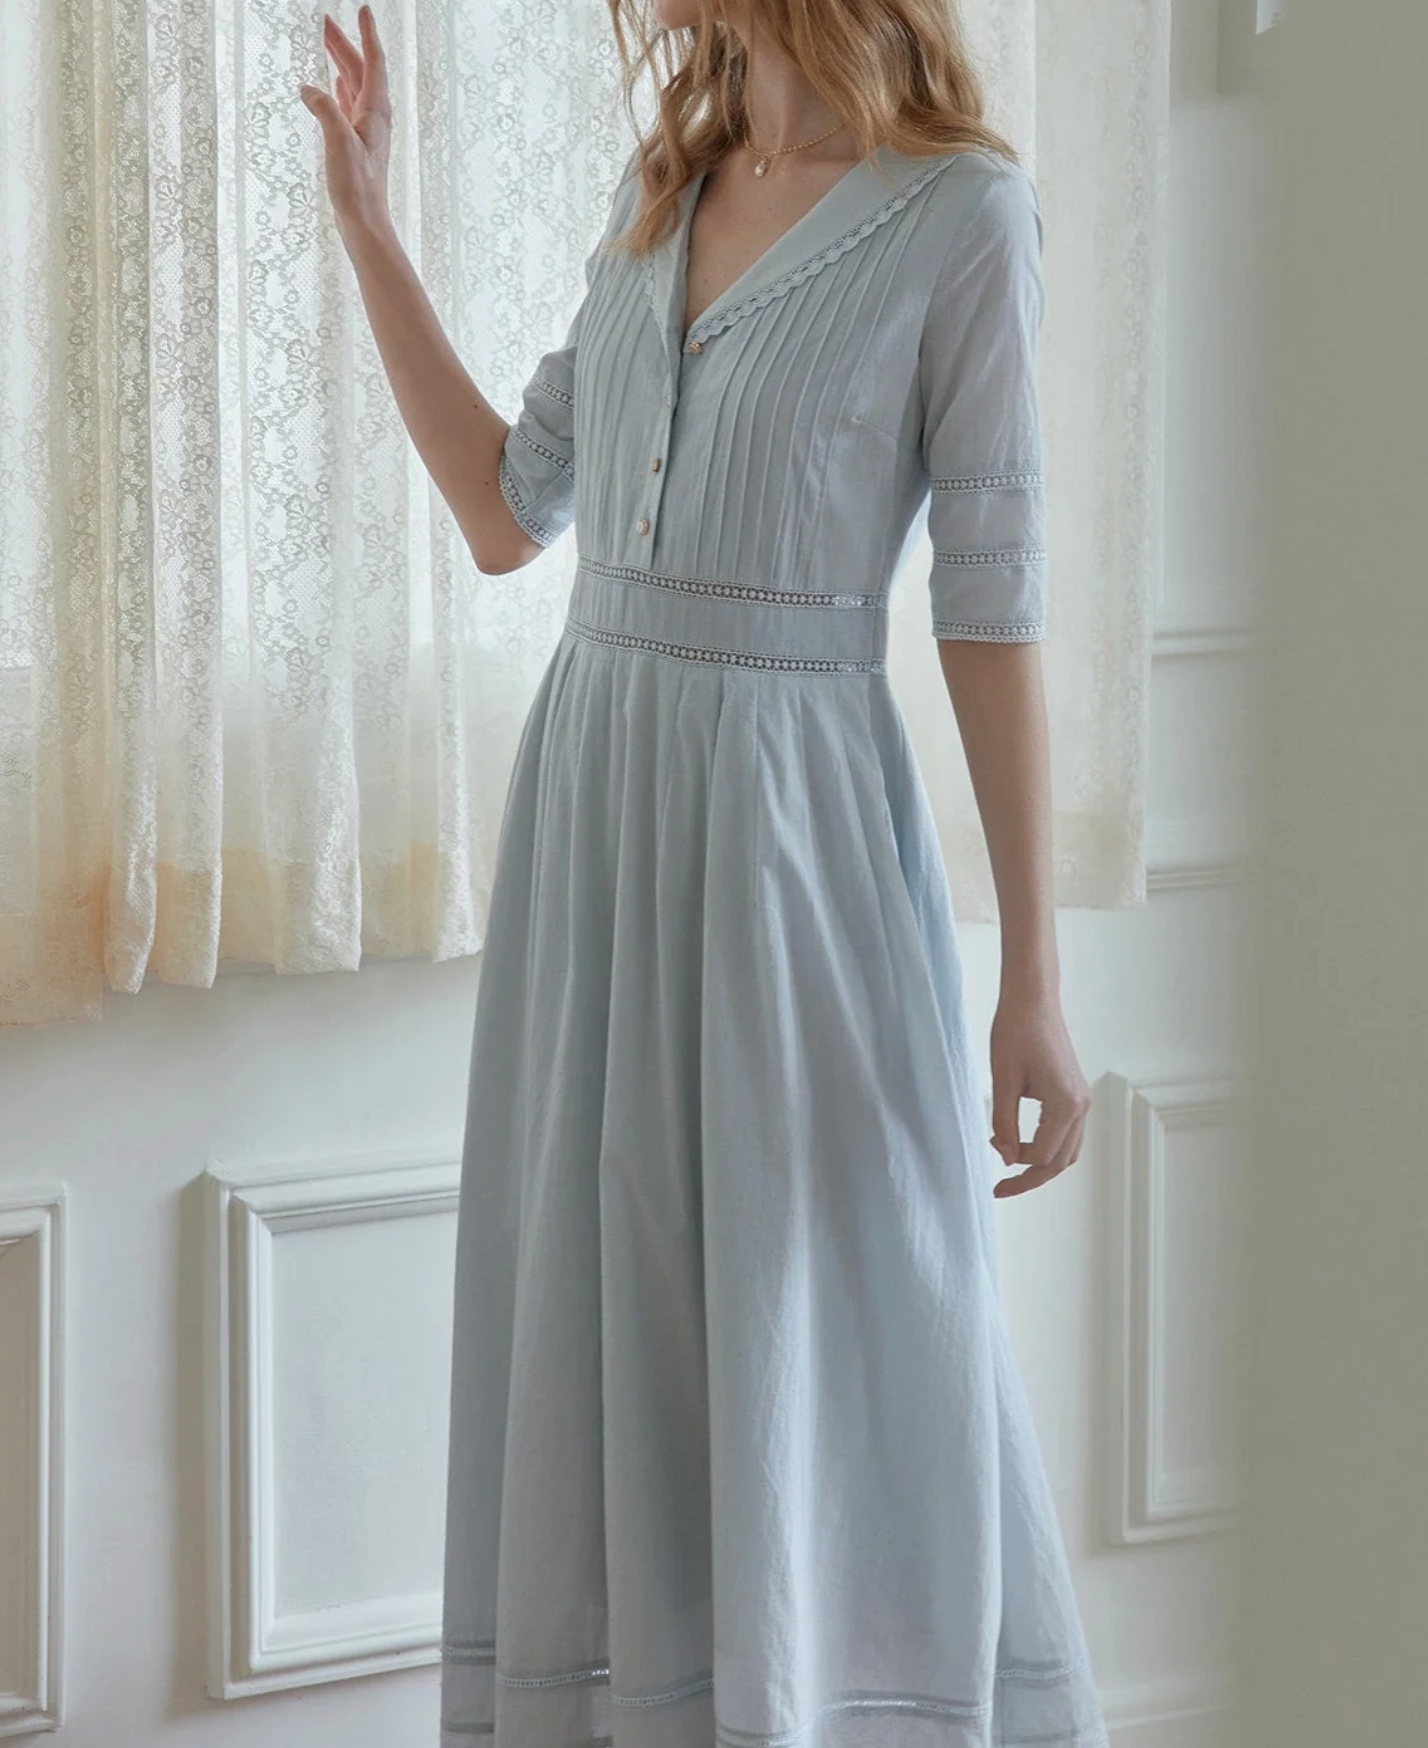 Cotton Dresses, Modesty, Ships from Canada. Pastel Blue cotton dress in sailor collar style